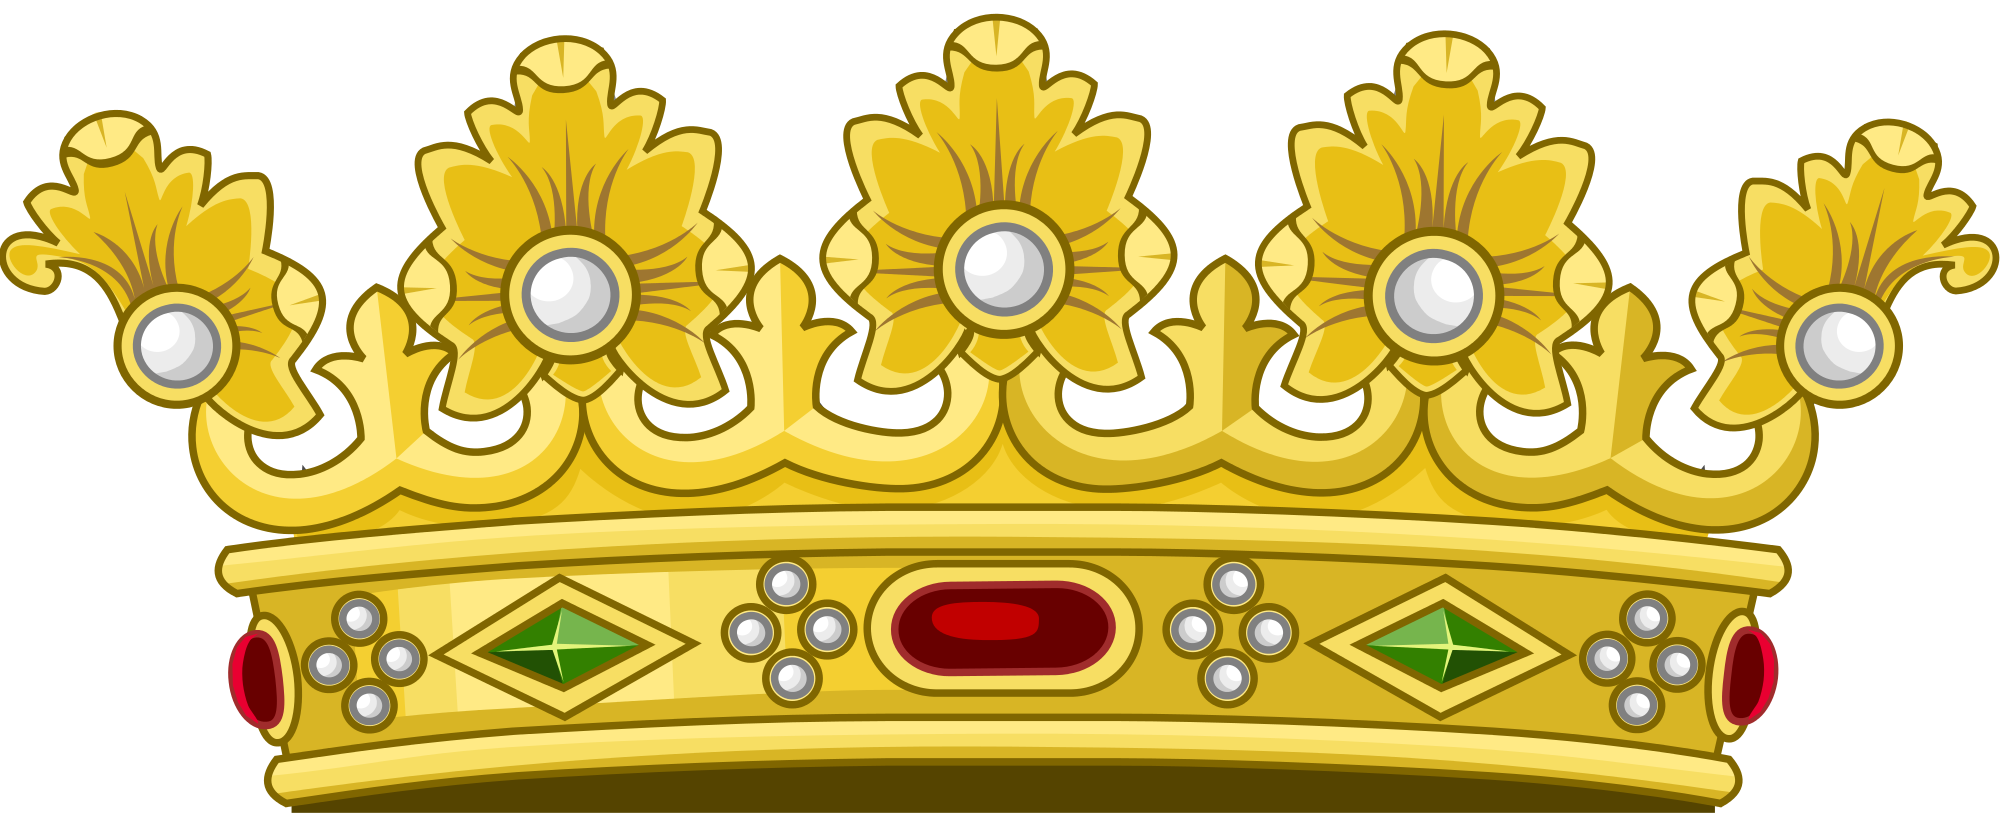 crown clipart king's